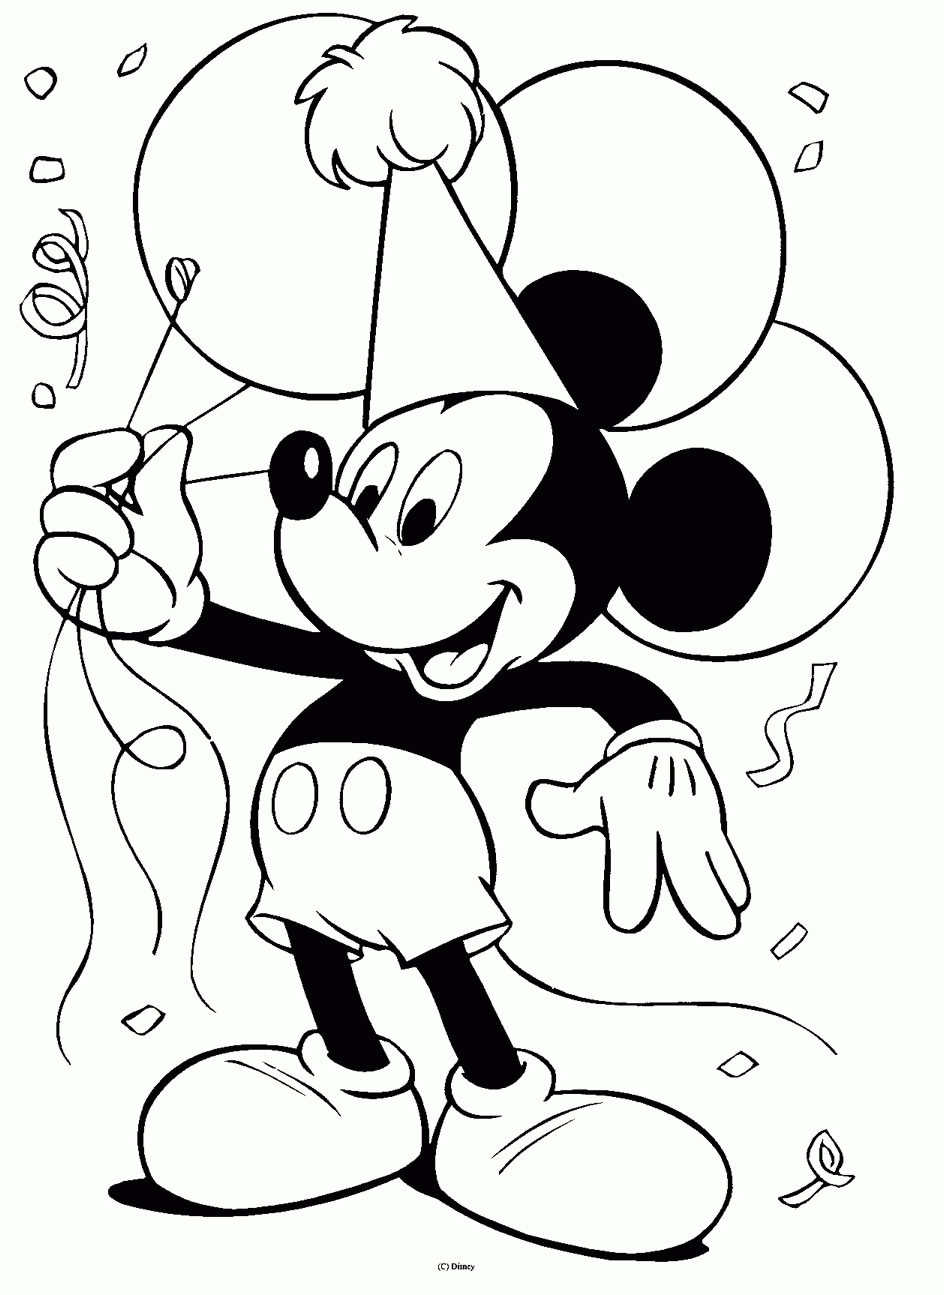 disney character coloring pages disney coloring pages pages coloring disney character 